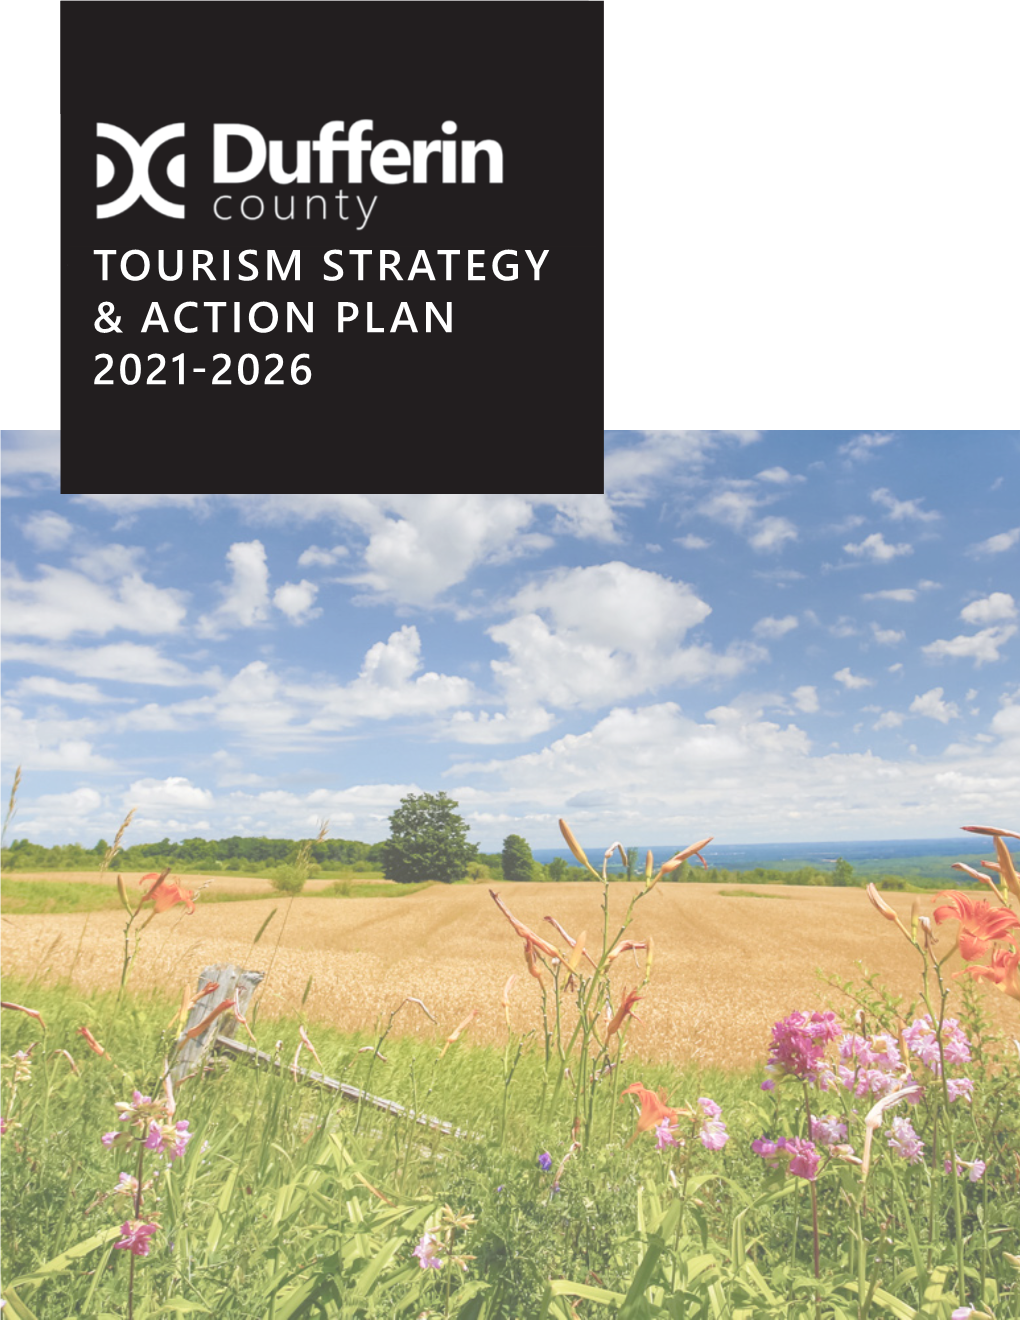 Tourism Strategy & Action Plan 2021-2026